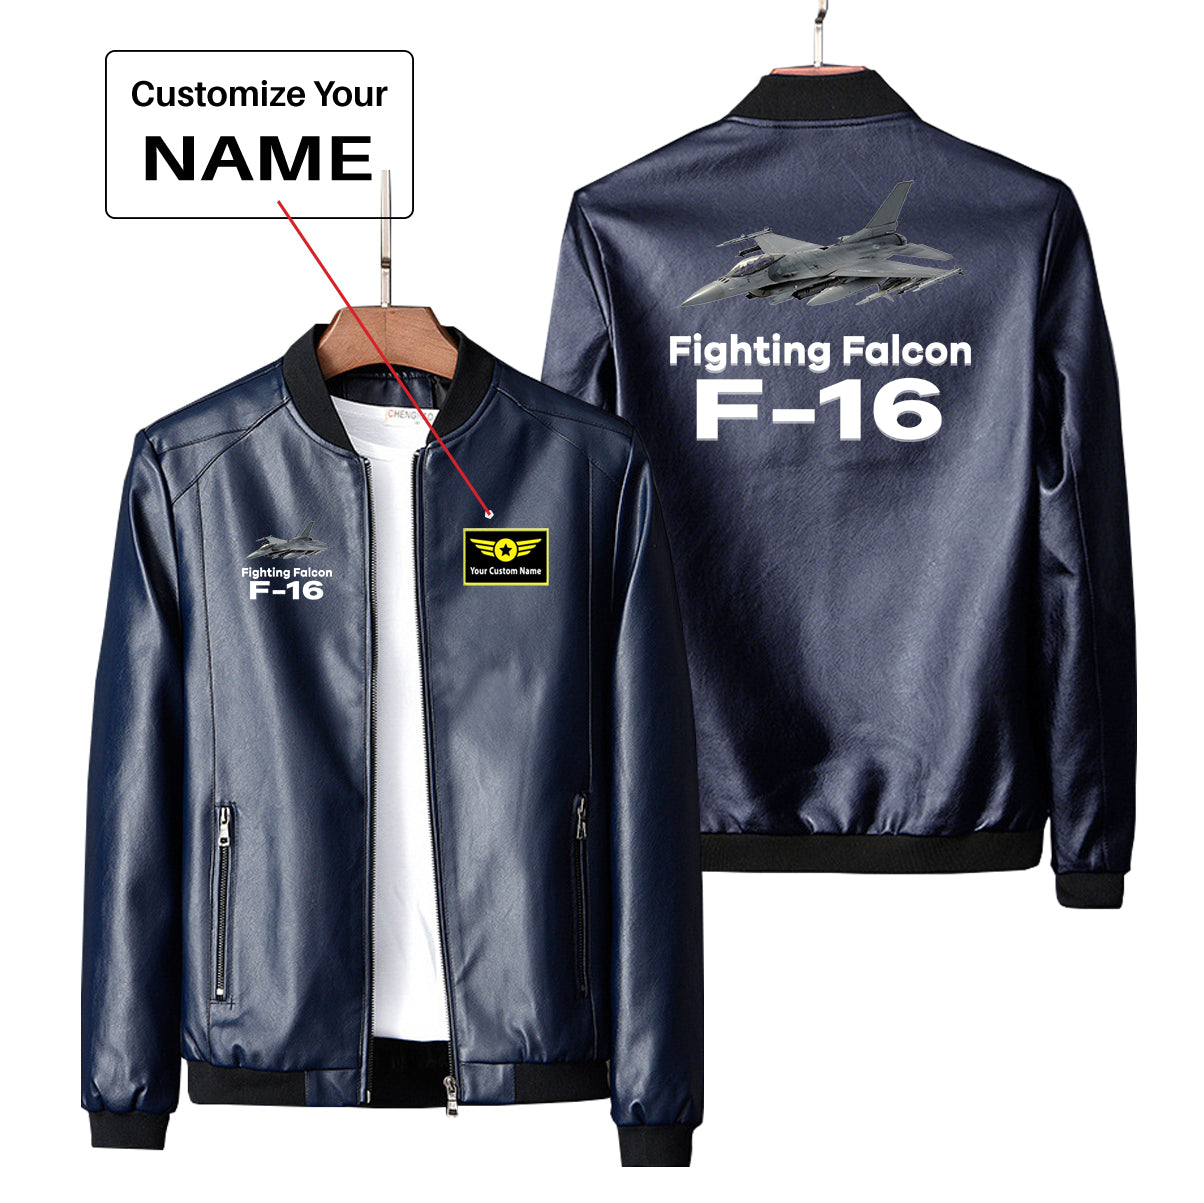 The Fighting Falcon F16 Designed PU Leather Jackets